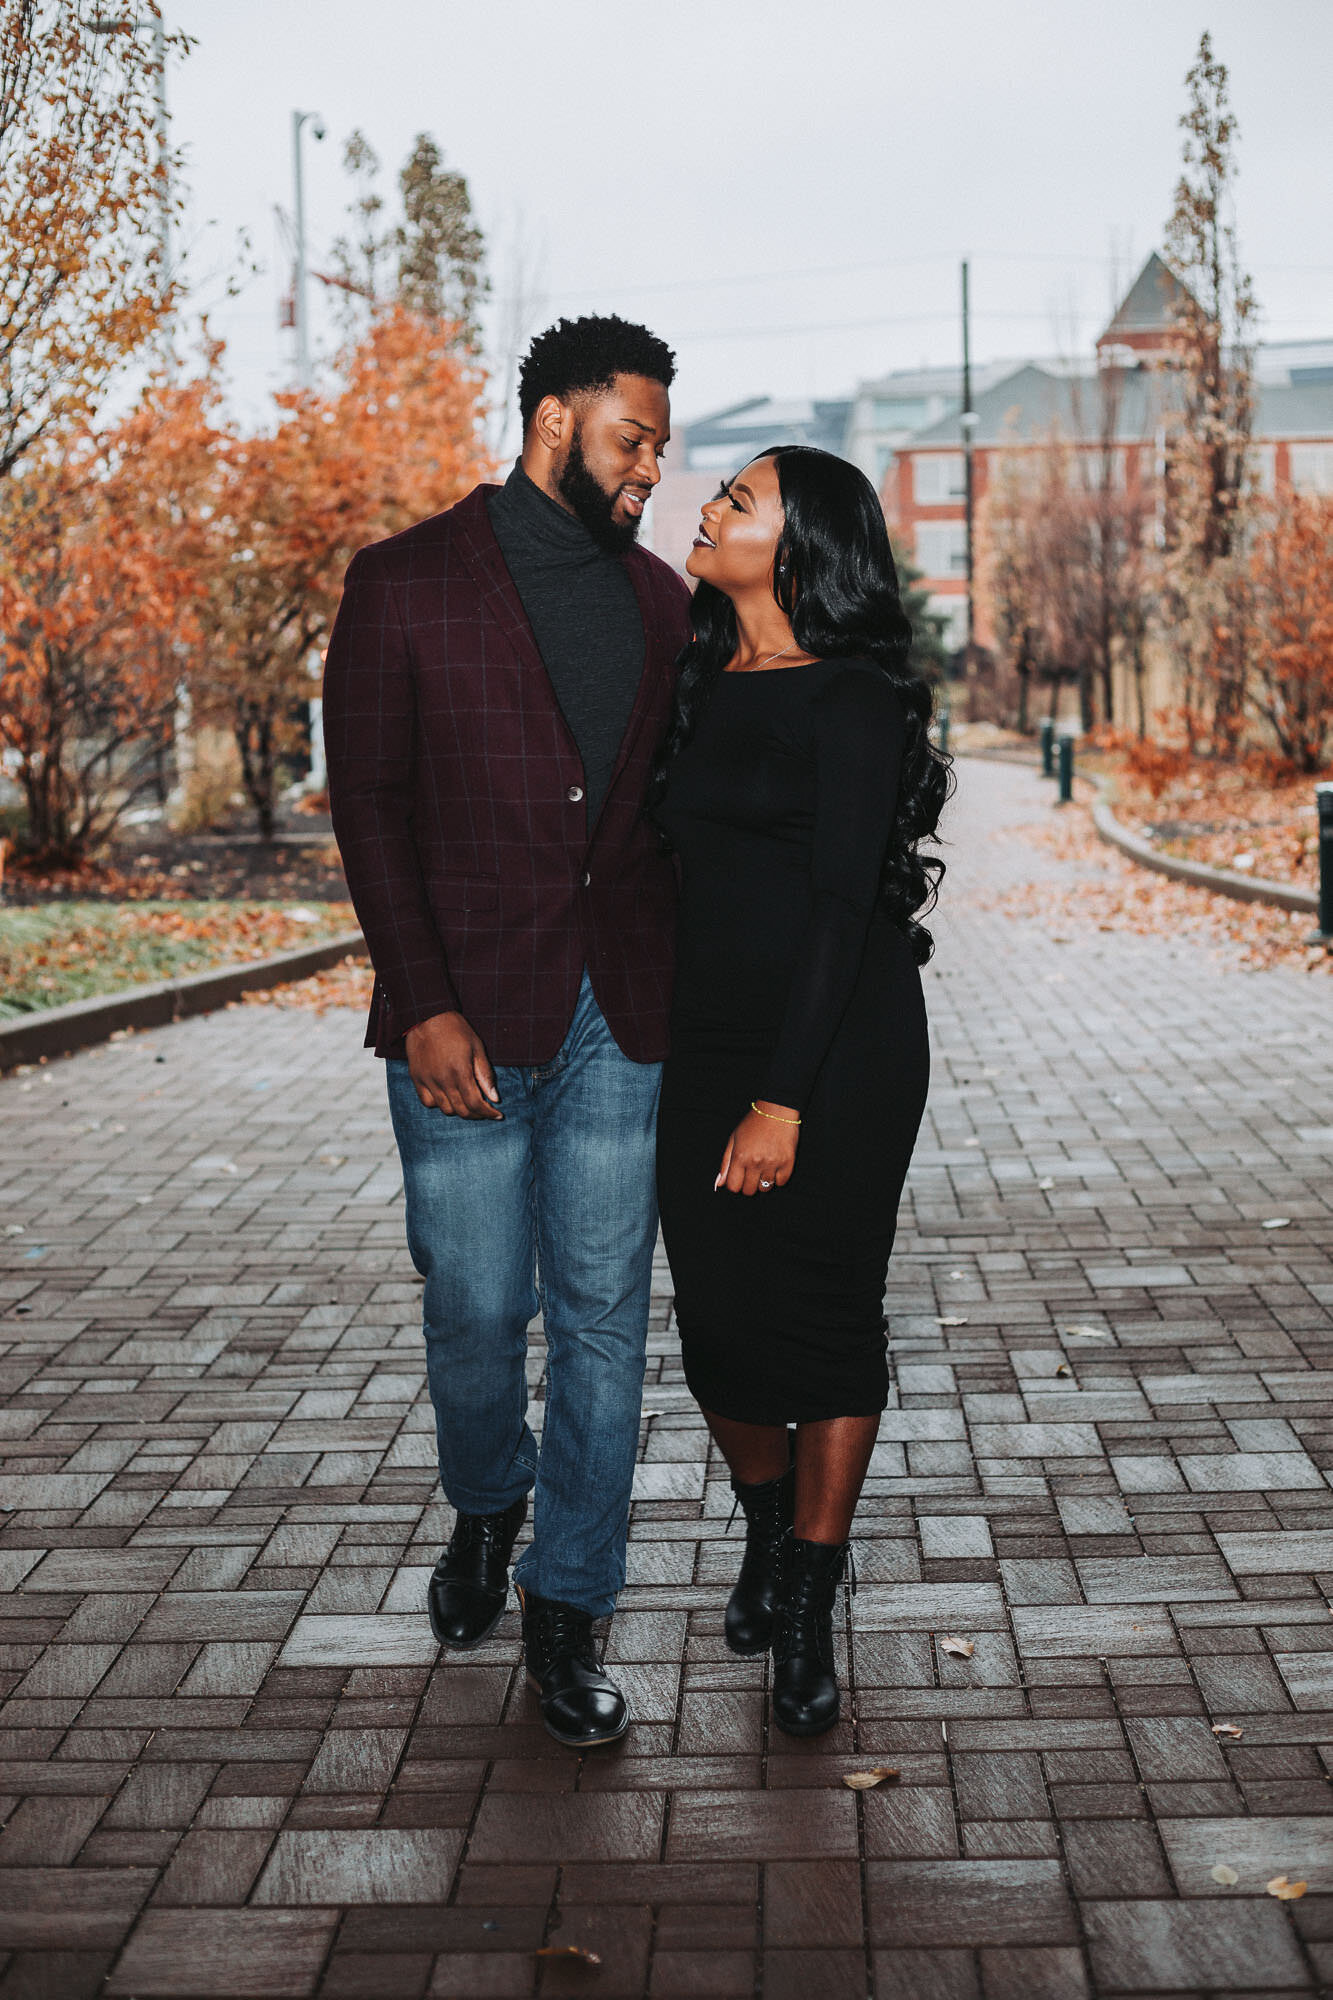 Engagement Session at The Alexander Hotel-Indianapolis, IN -209.JPG